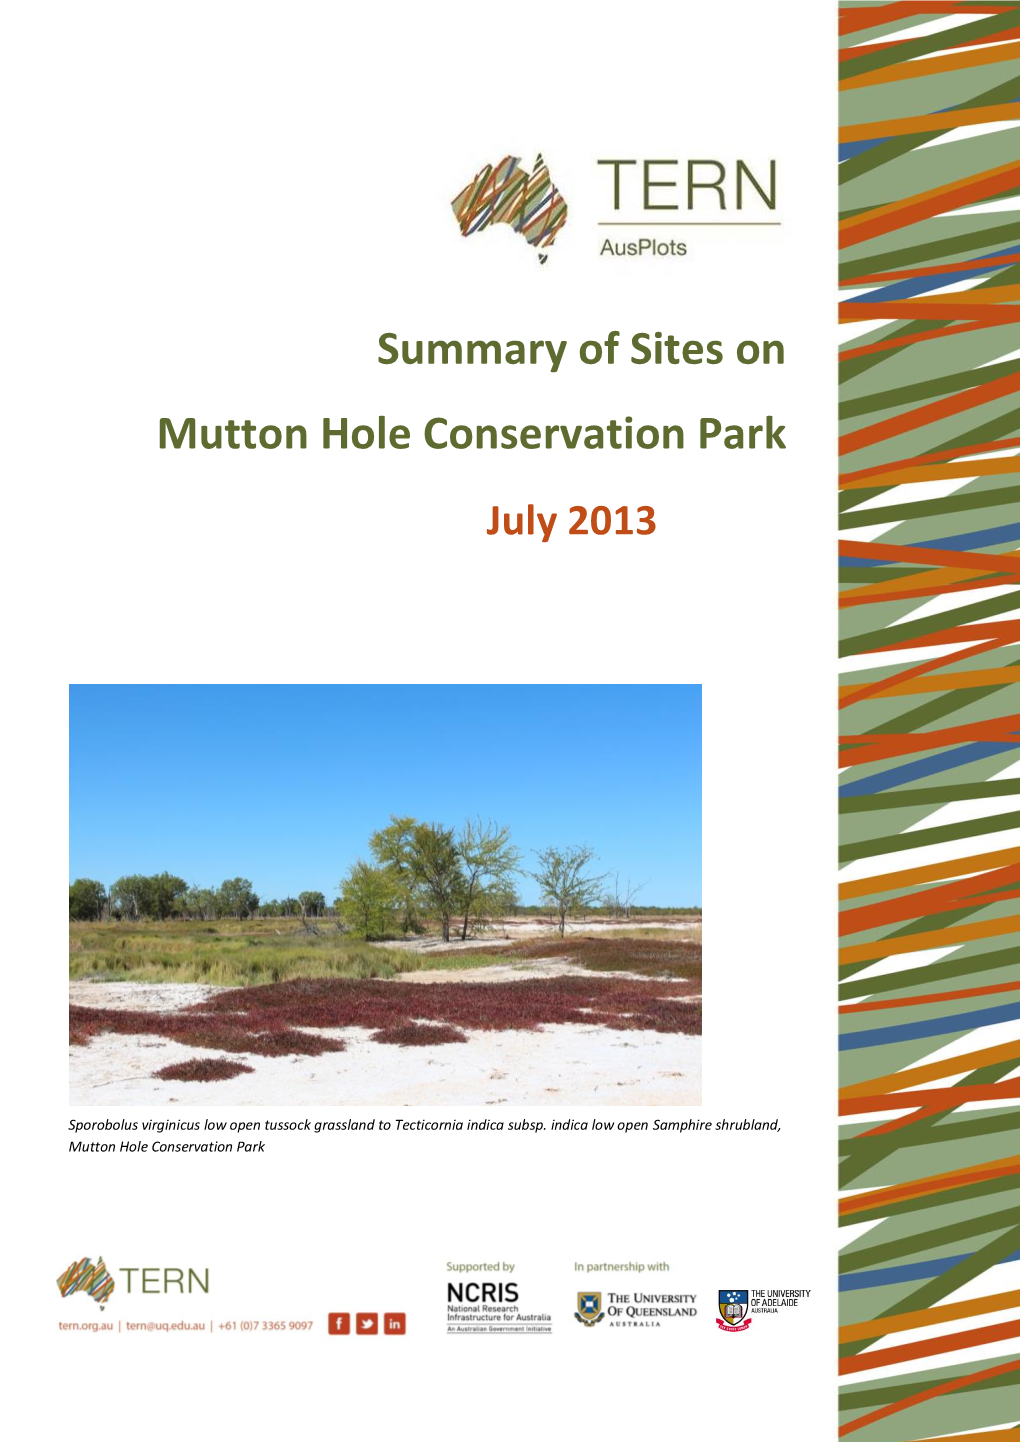 Summary of Sites on Mutton Hole Conservation Park